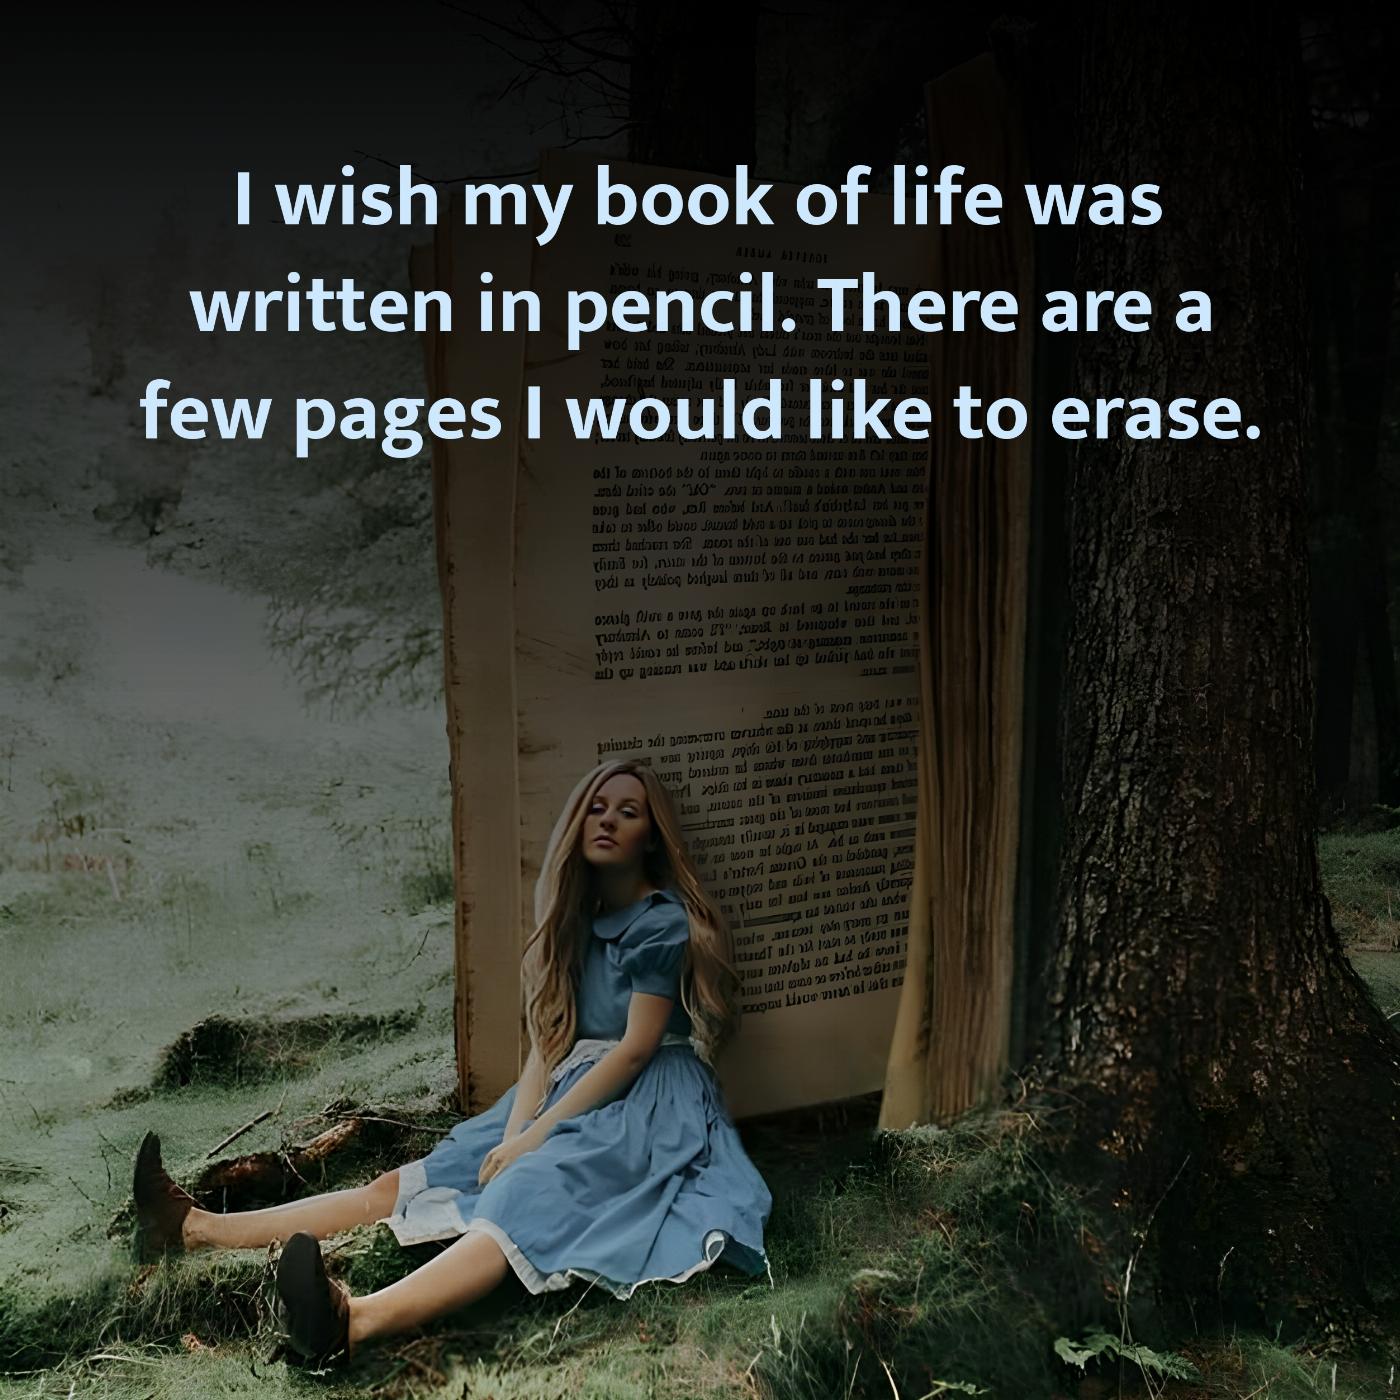 I wish my book of life was written in pencil